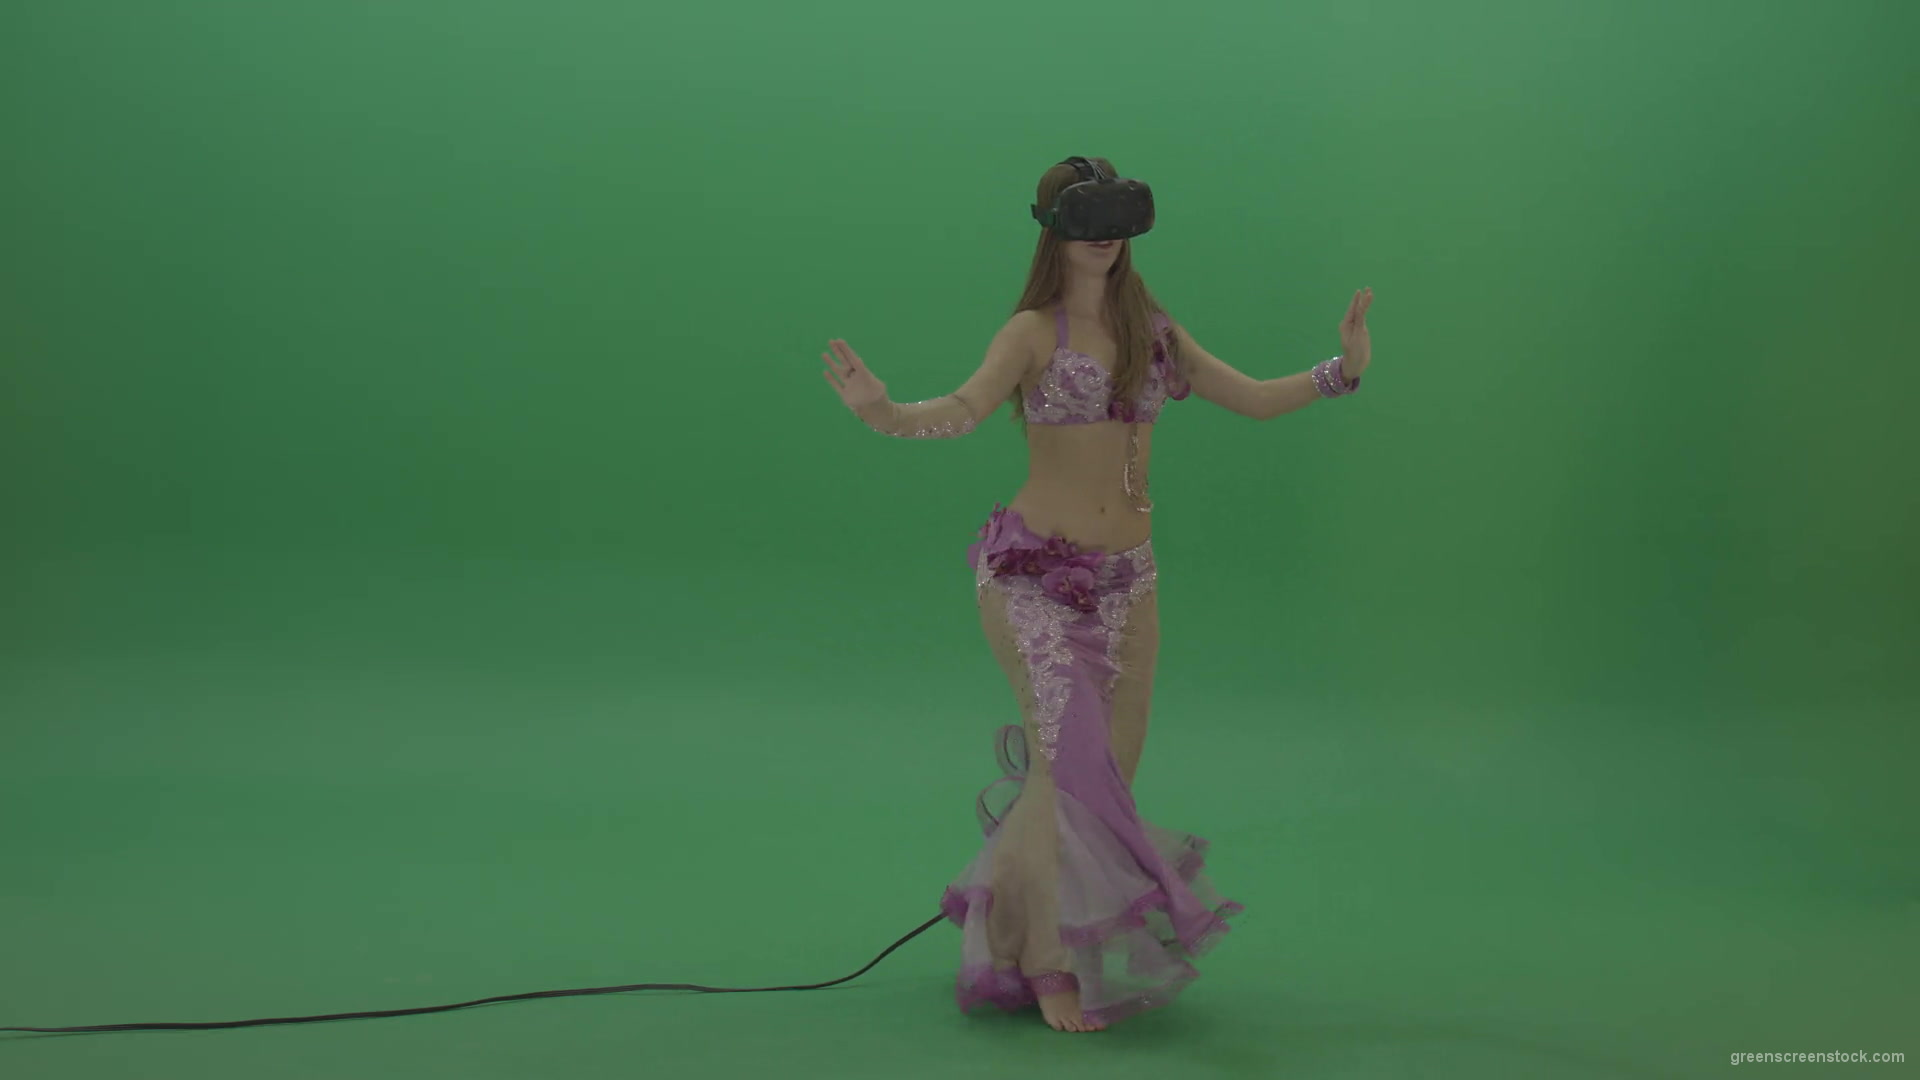 Beautiful-belly-dancer-in-purple-wear-and-VR-headset-dances-over-green-screen-background-1920_007 Green Screen Stock